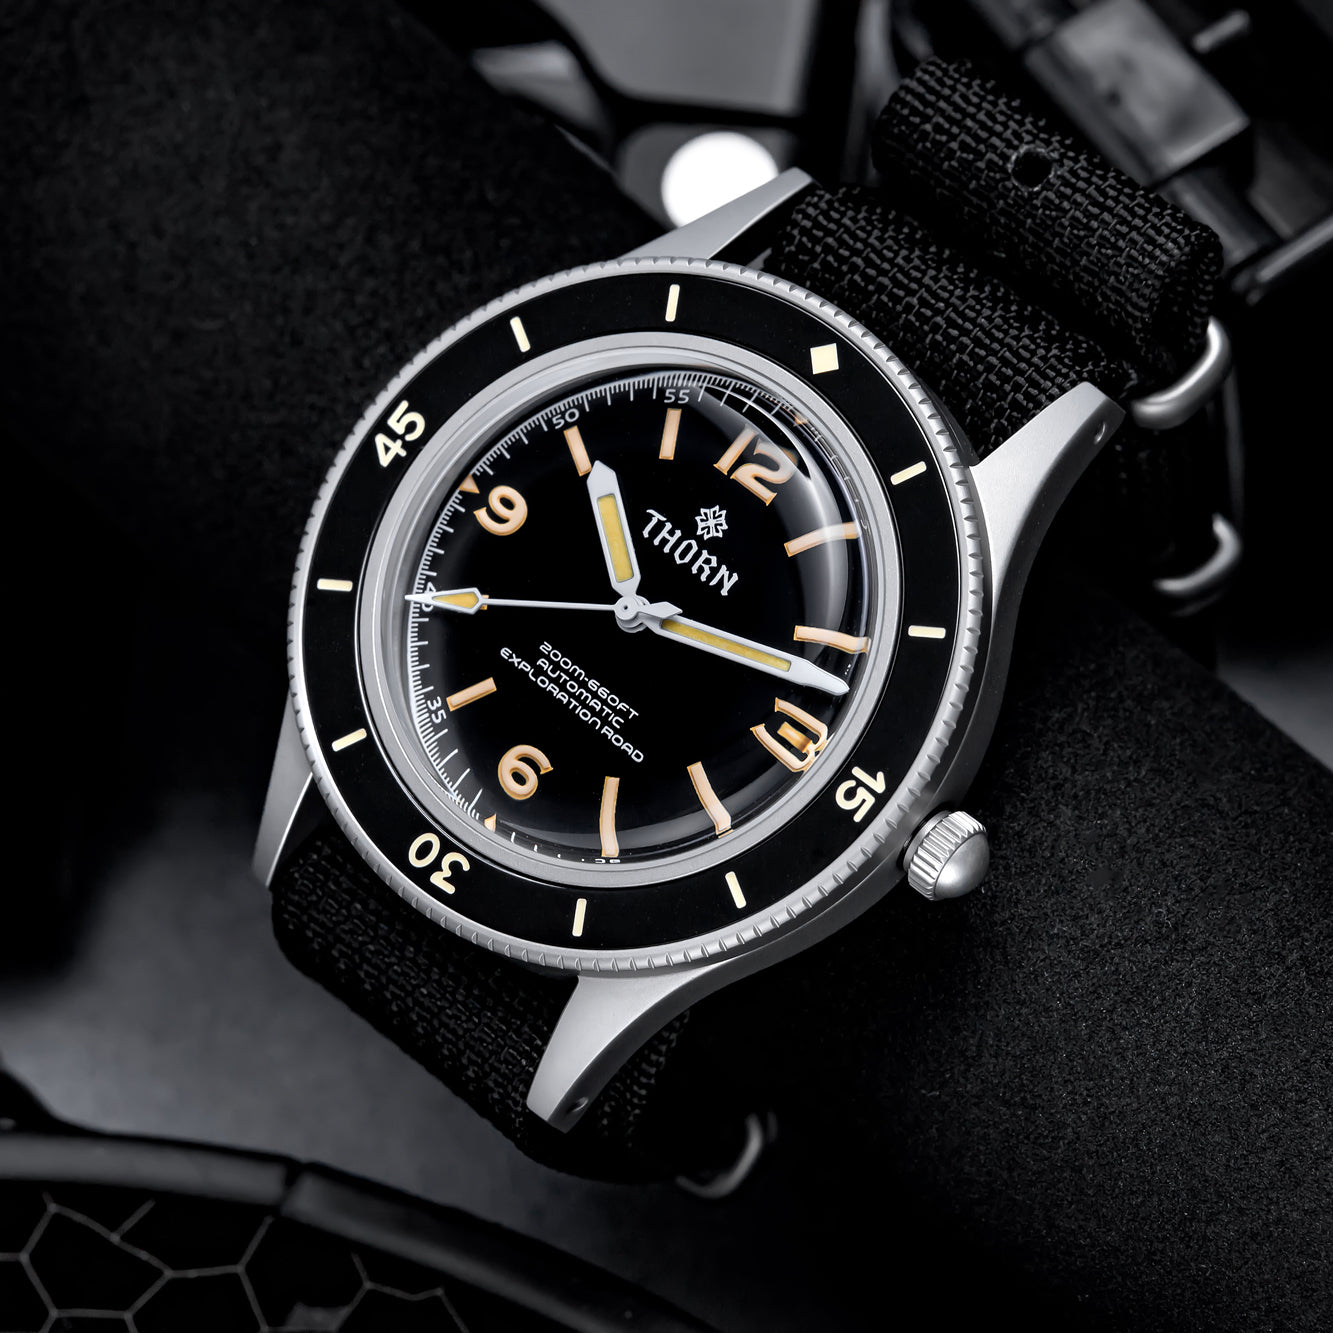 ★Limited Offer★Thorn Vintage Fifty Fathoms Dive Automatic Mechanical Watch